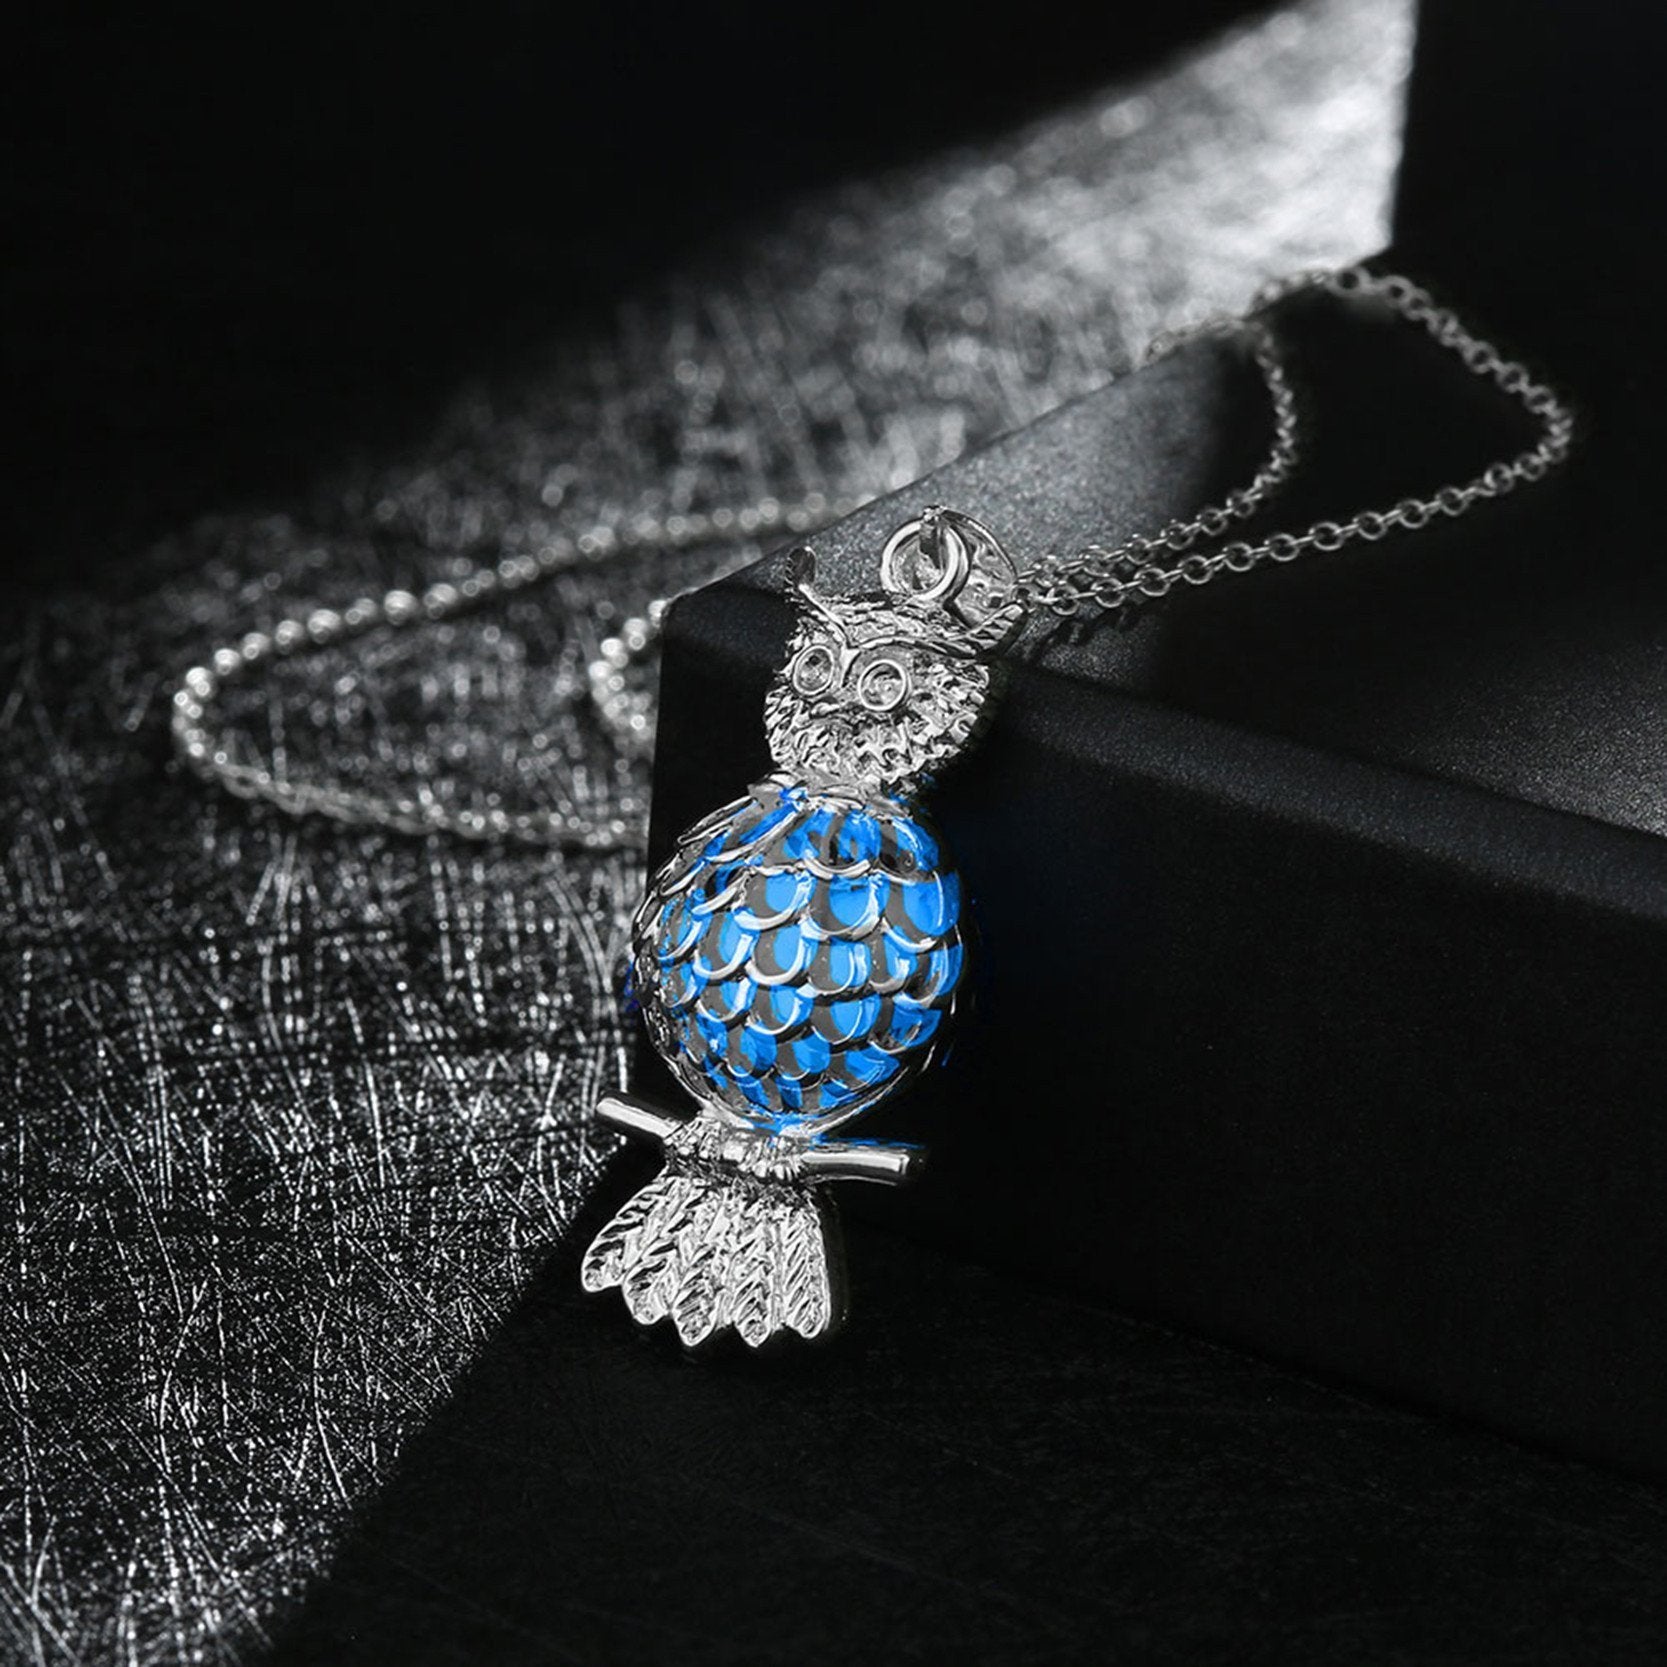 Pendant Necklaces - Glowing In The Dark Owl Necklace